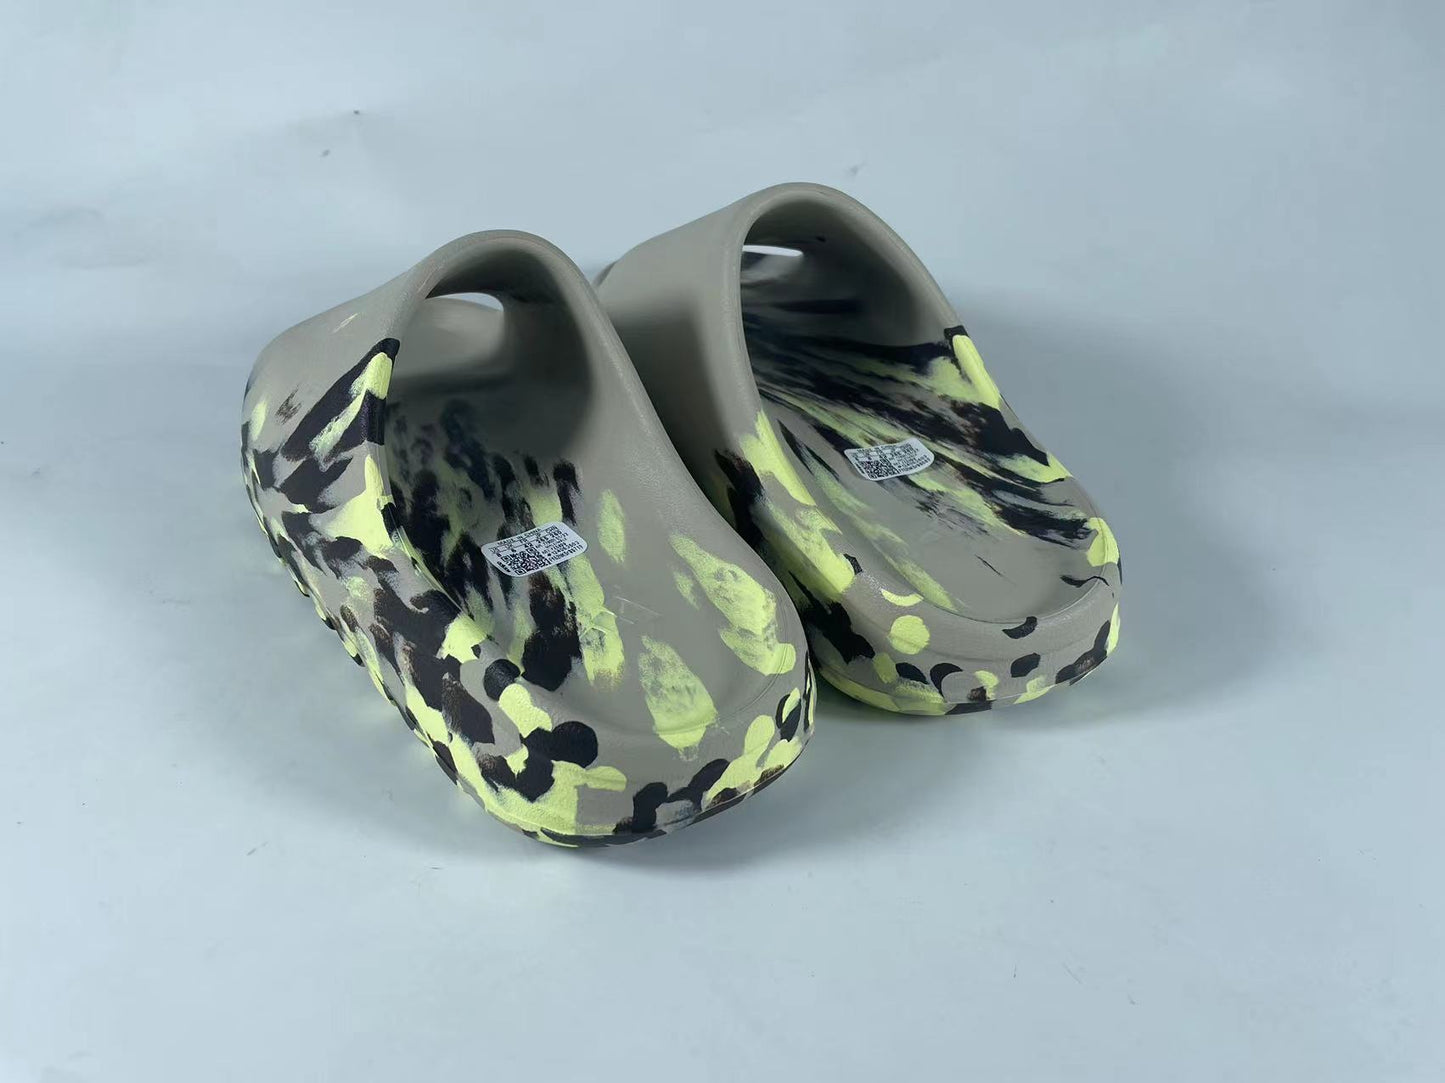 Yeezy Slide "Enflame Oil Painting Ink Yellow" (Unreleased & Very Limited)